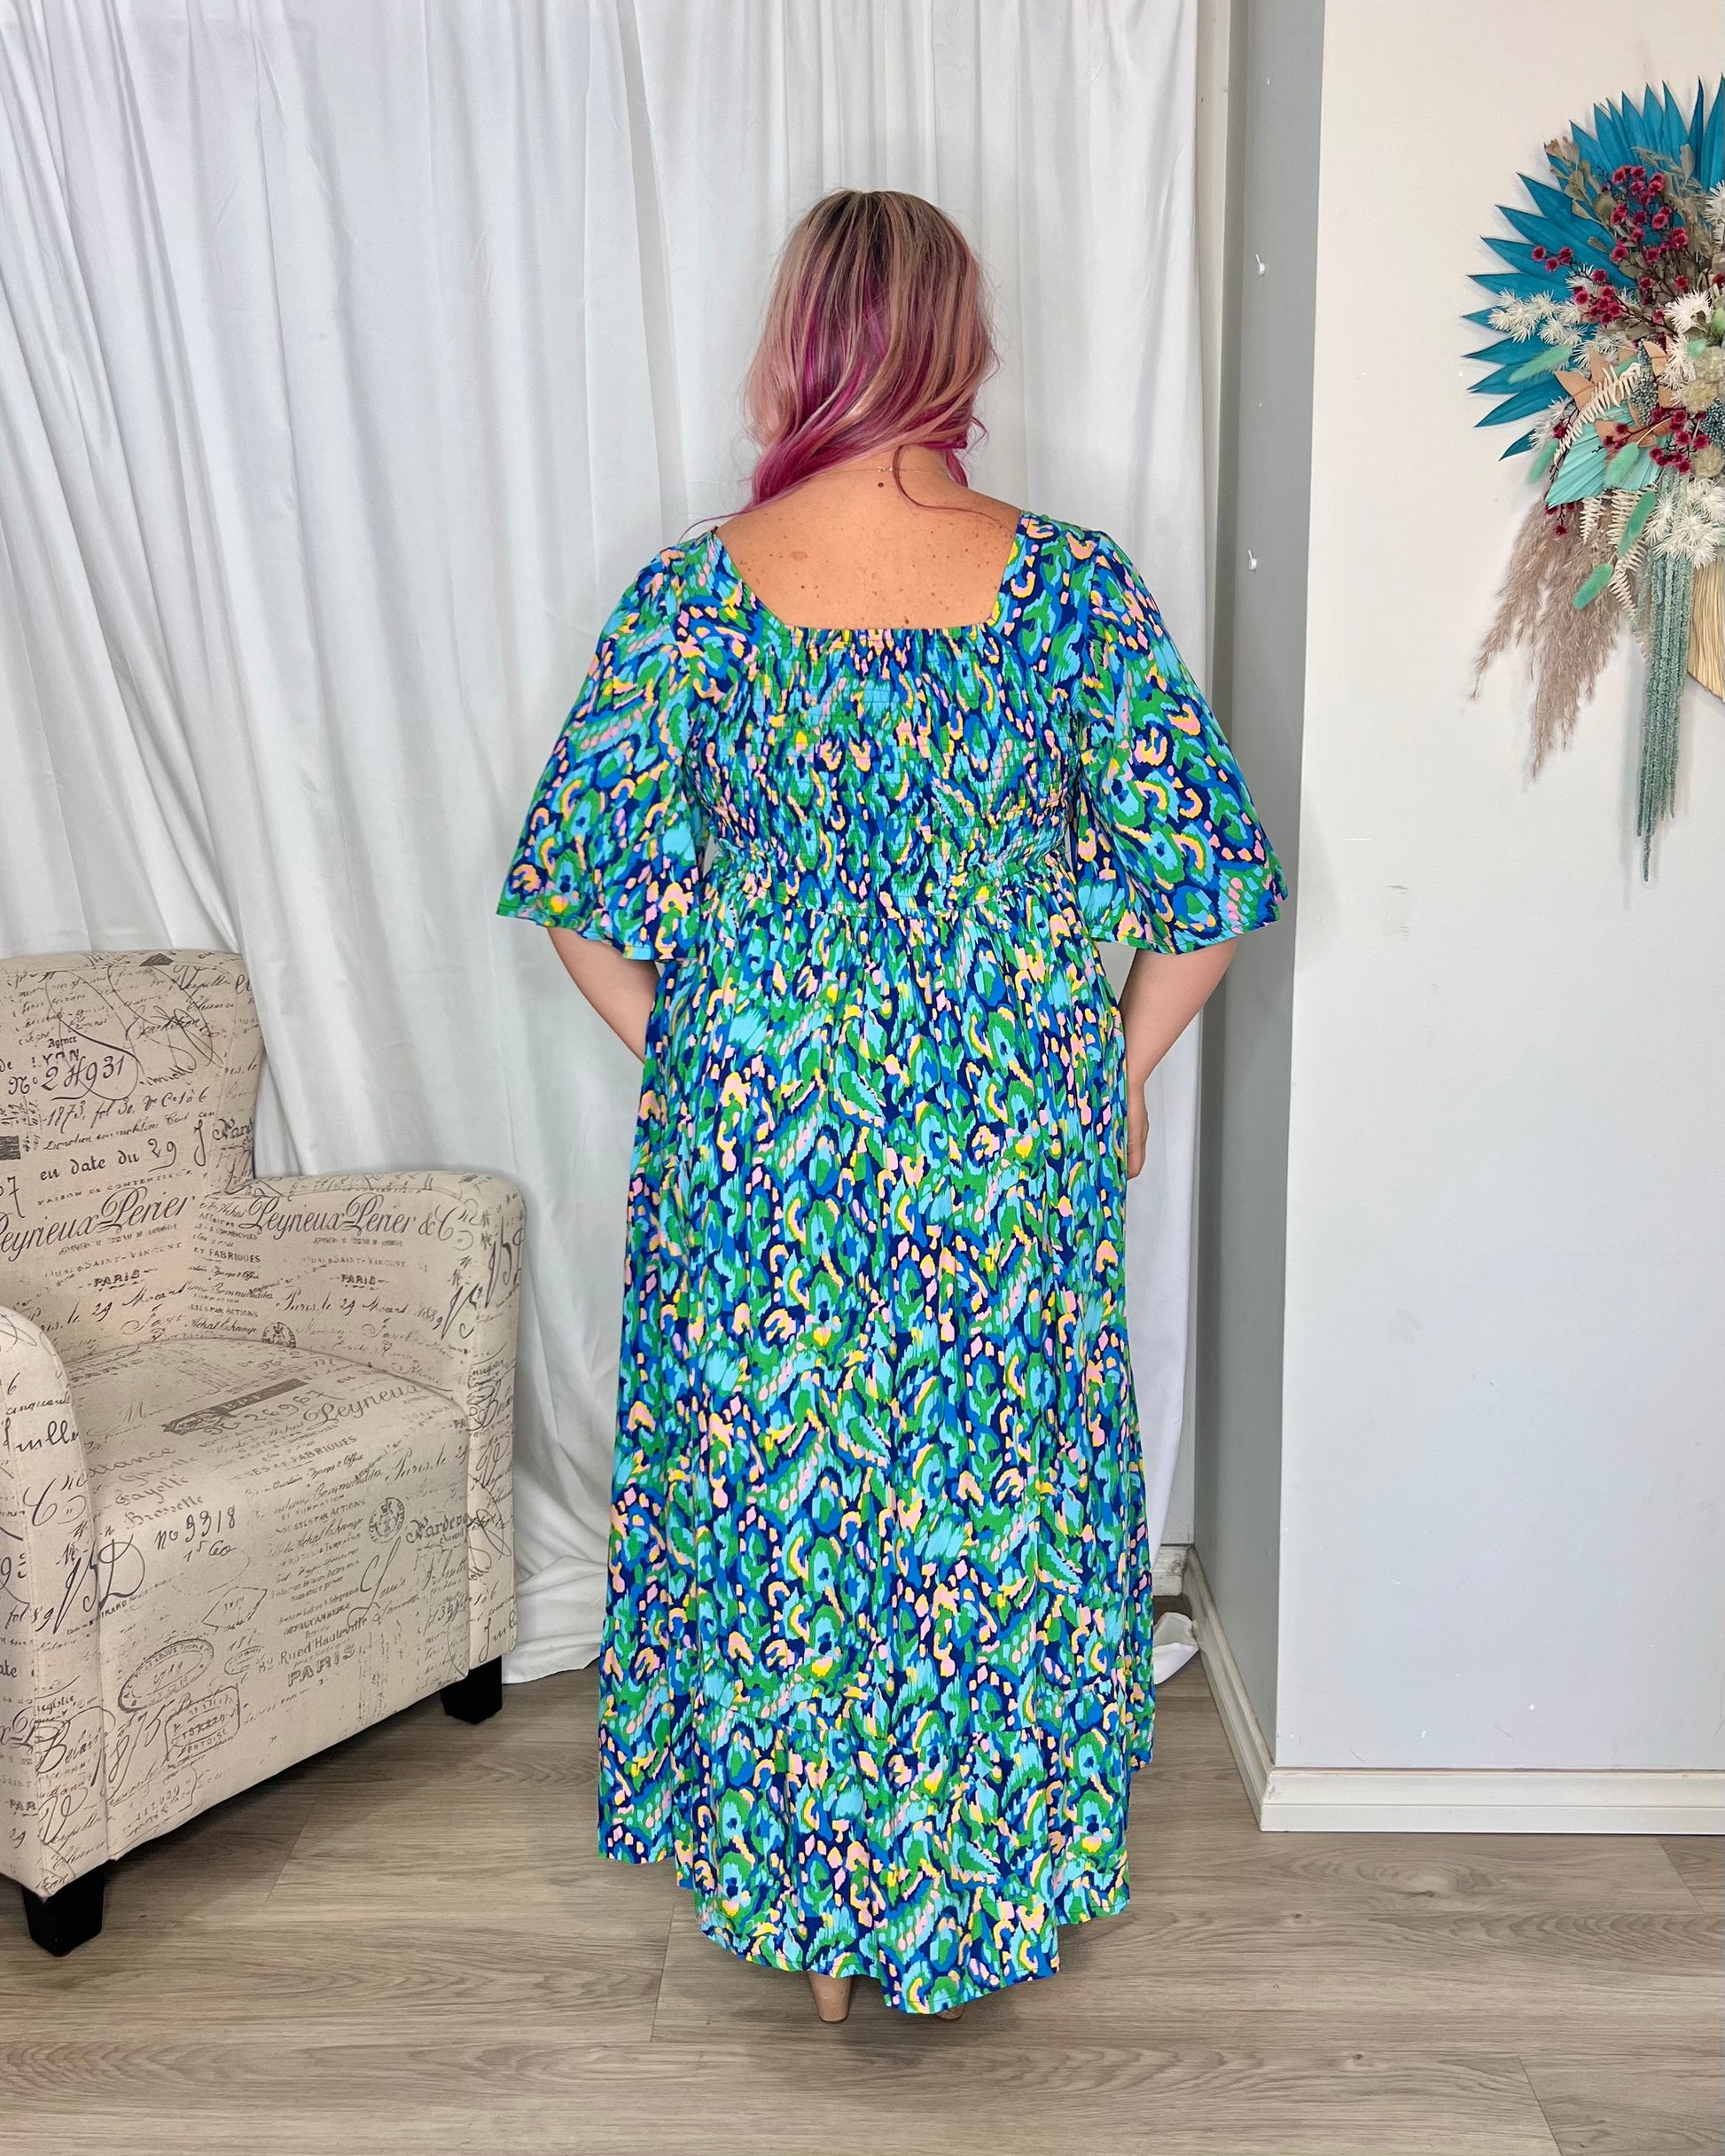 *NEW* Kalani Maxi Dress: 
Our Kalani Dress is a summer show stopper! That print, the cut, the maxi length ... it is stunning. A flattering square cut neckline is complimented by a flowing sl - Ciao Bella Dresses - Bee Maddison